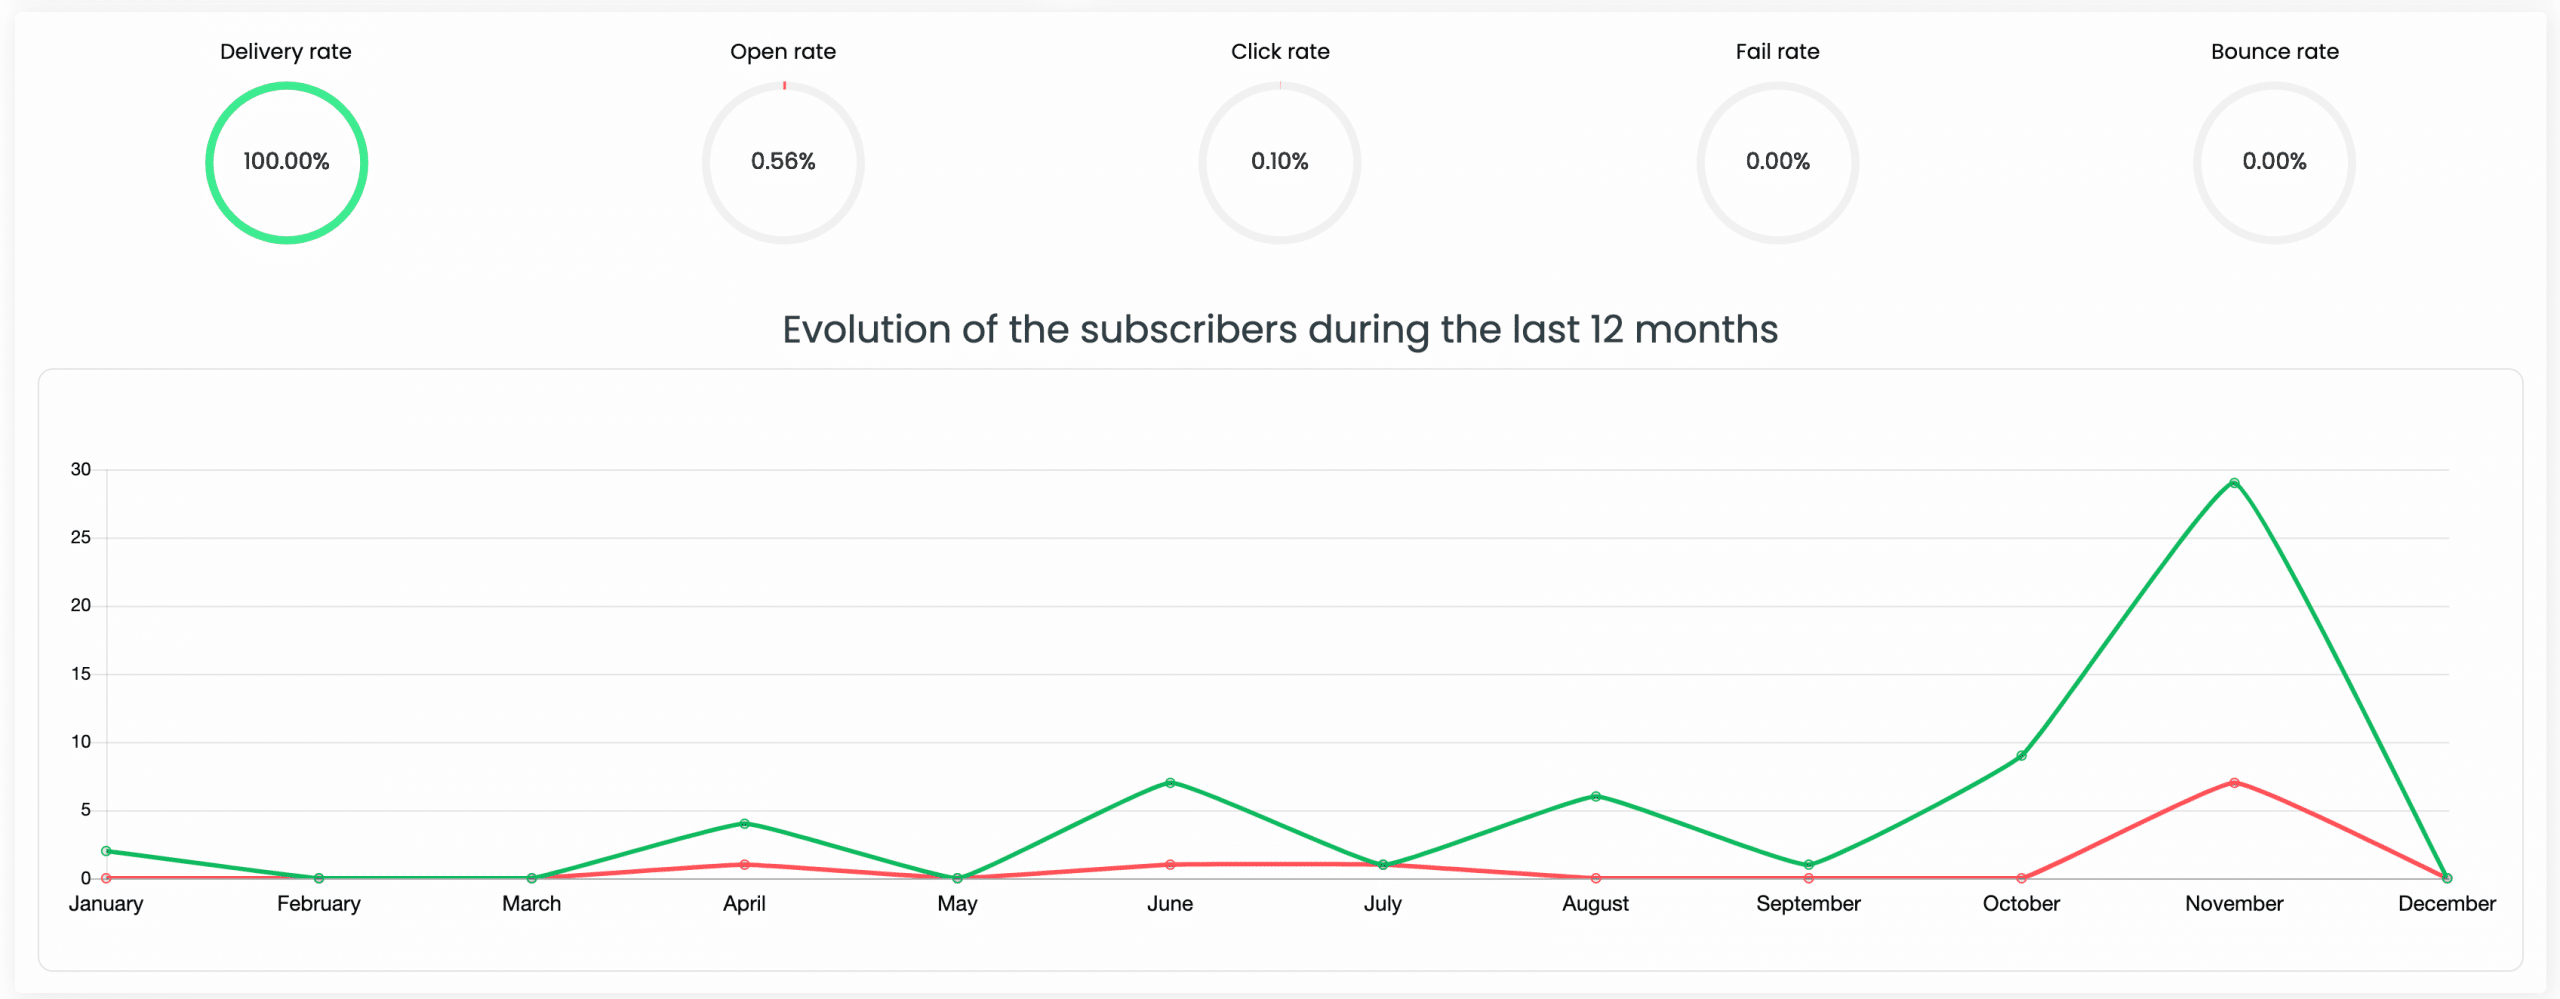 Evolution Of The Subscribers During The Last 12 Months